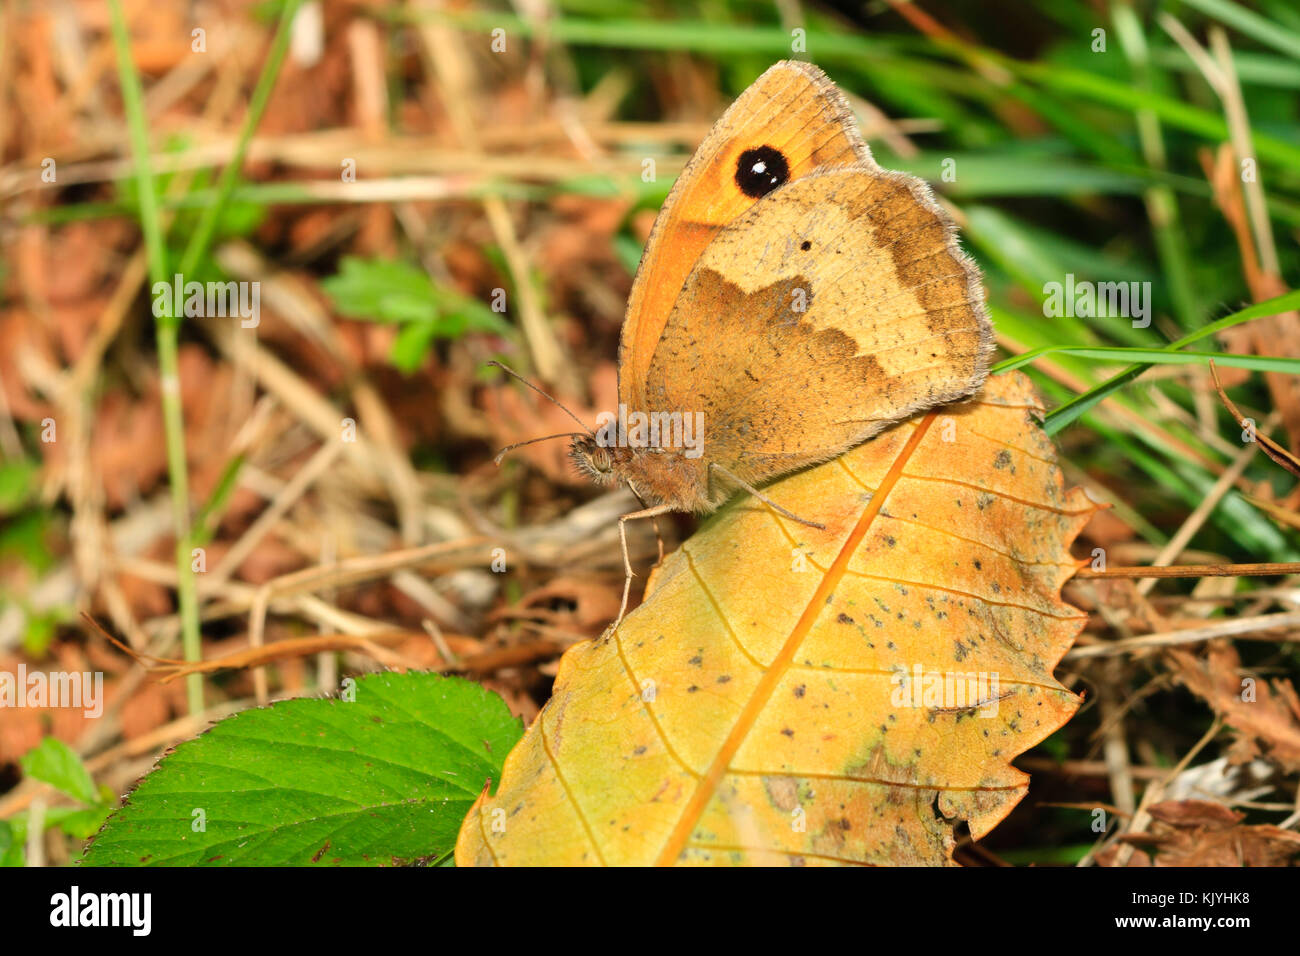 Maniola jurtina, the meadow brown butterfly, is camouflaged while resting on a fallen leaf Stock Photo